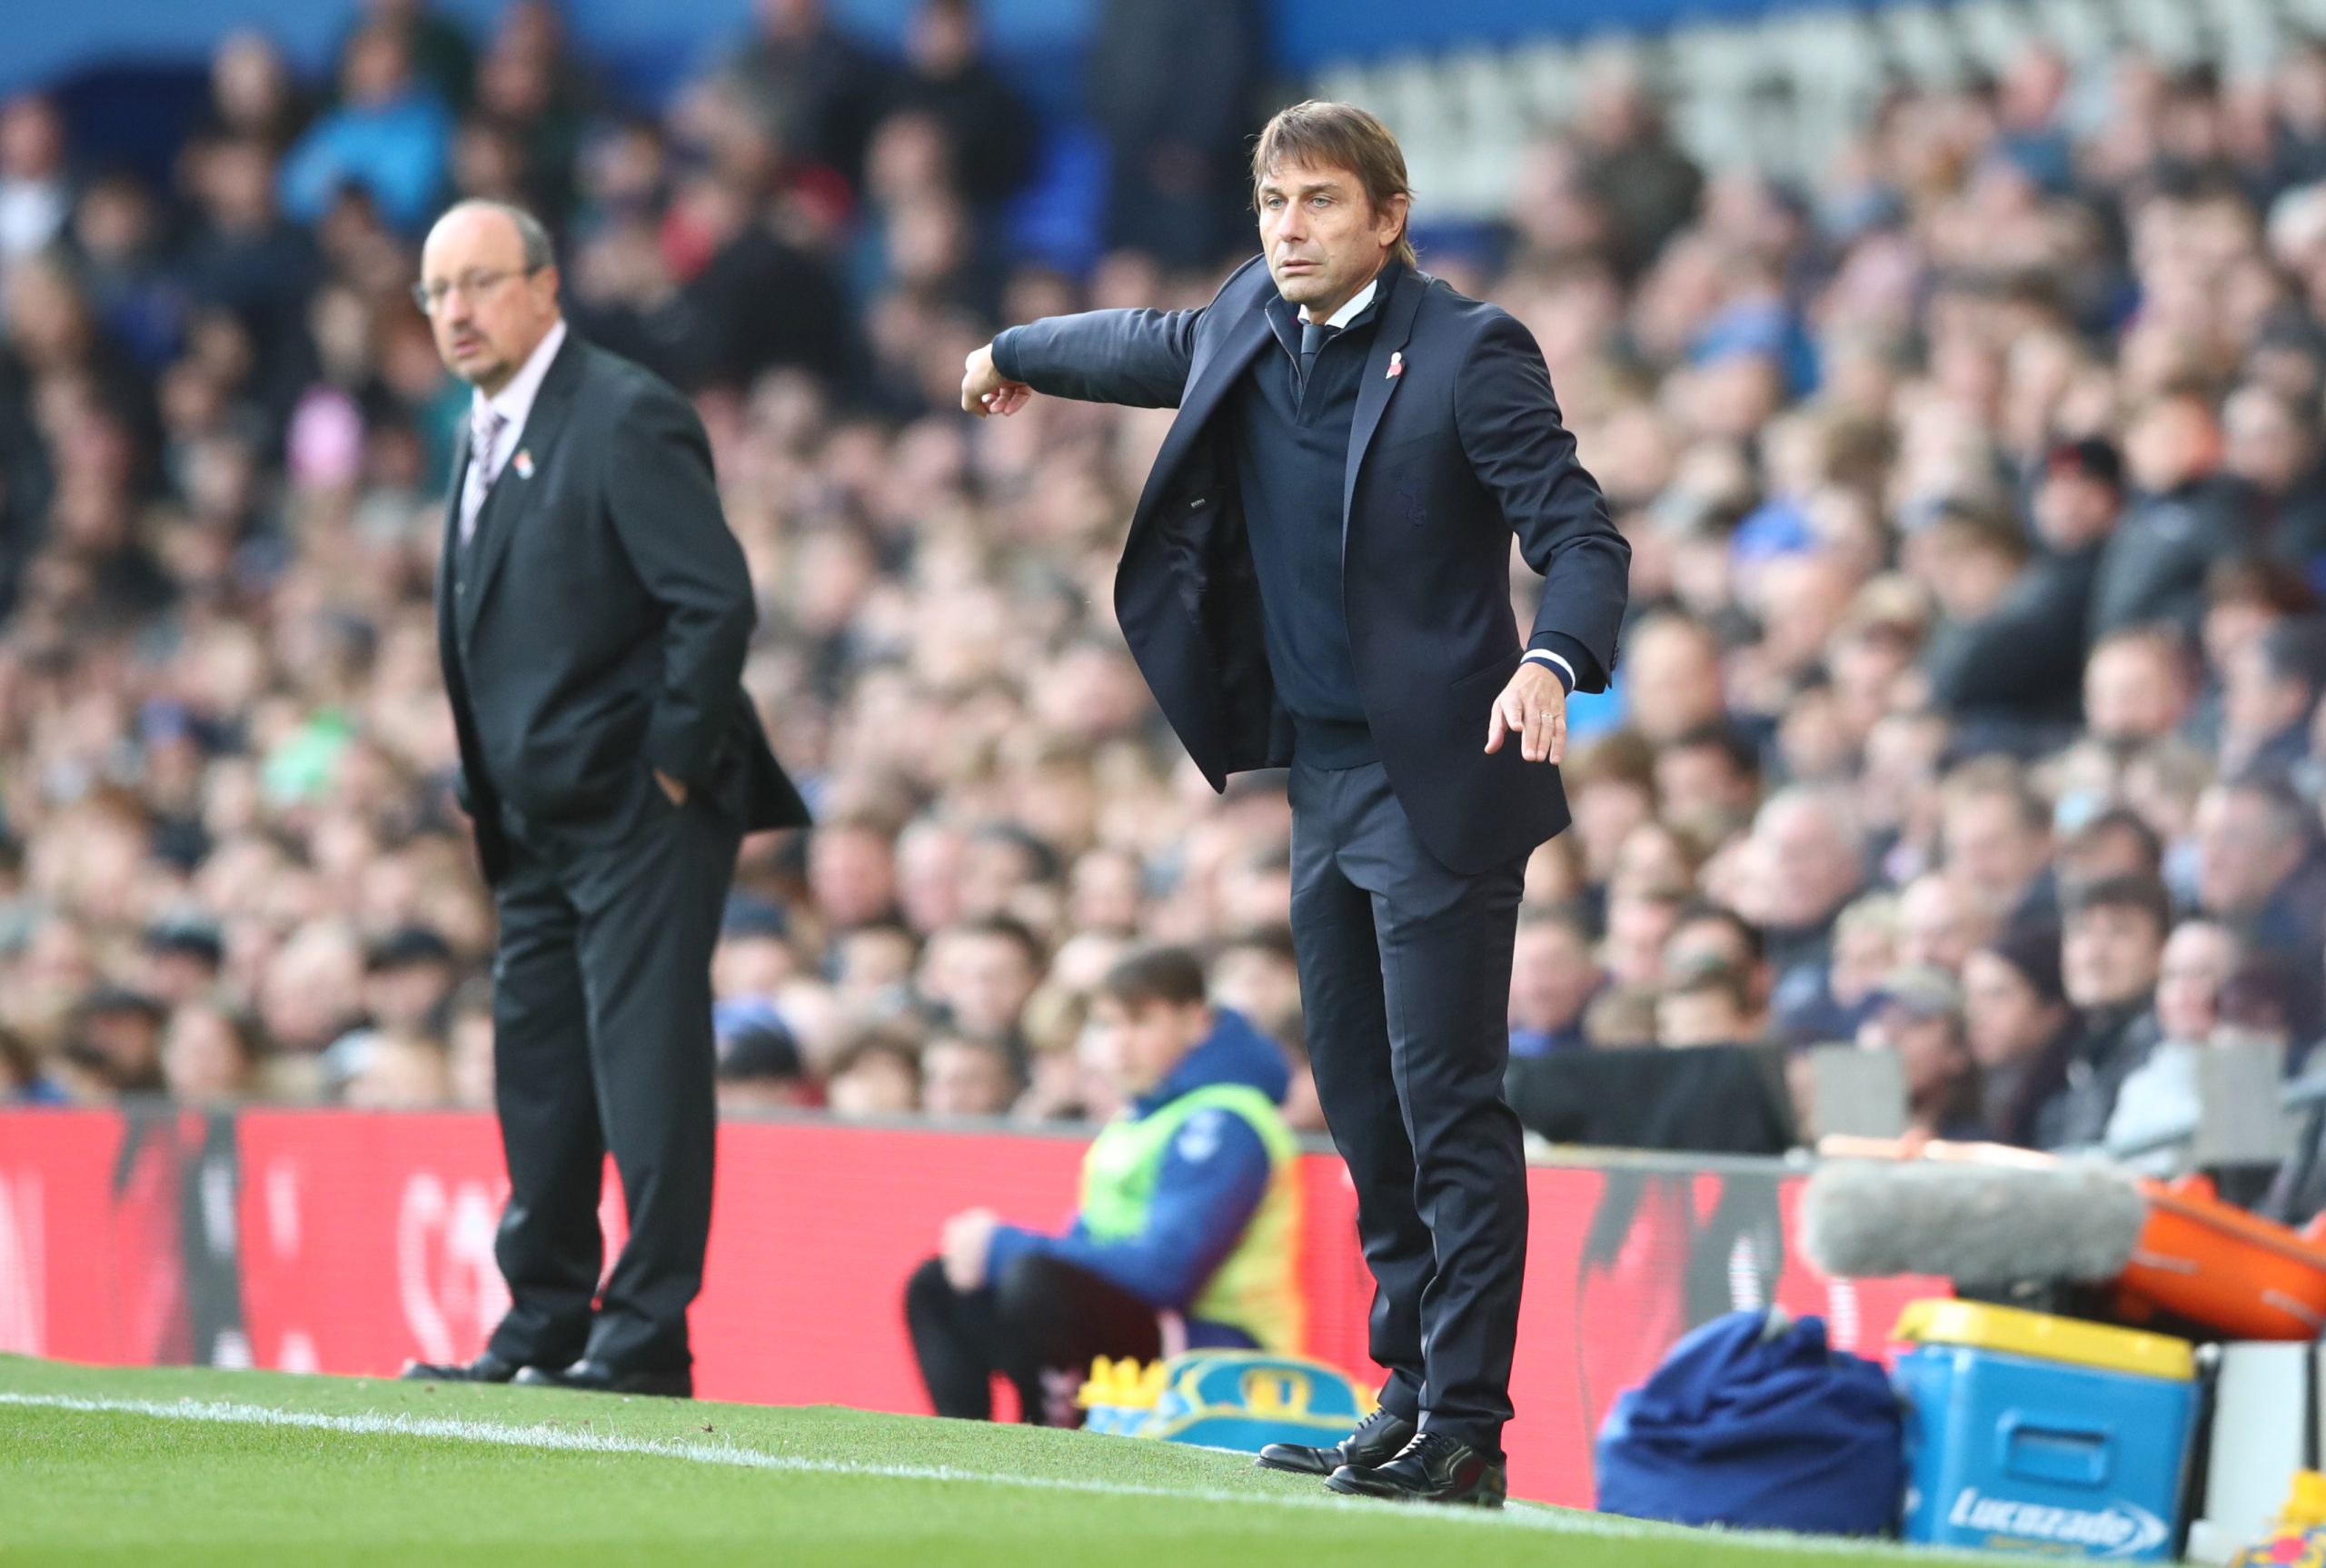 Antonio Conte led Tottenham Hotspur to a draw in his first league game in charge.